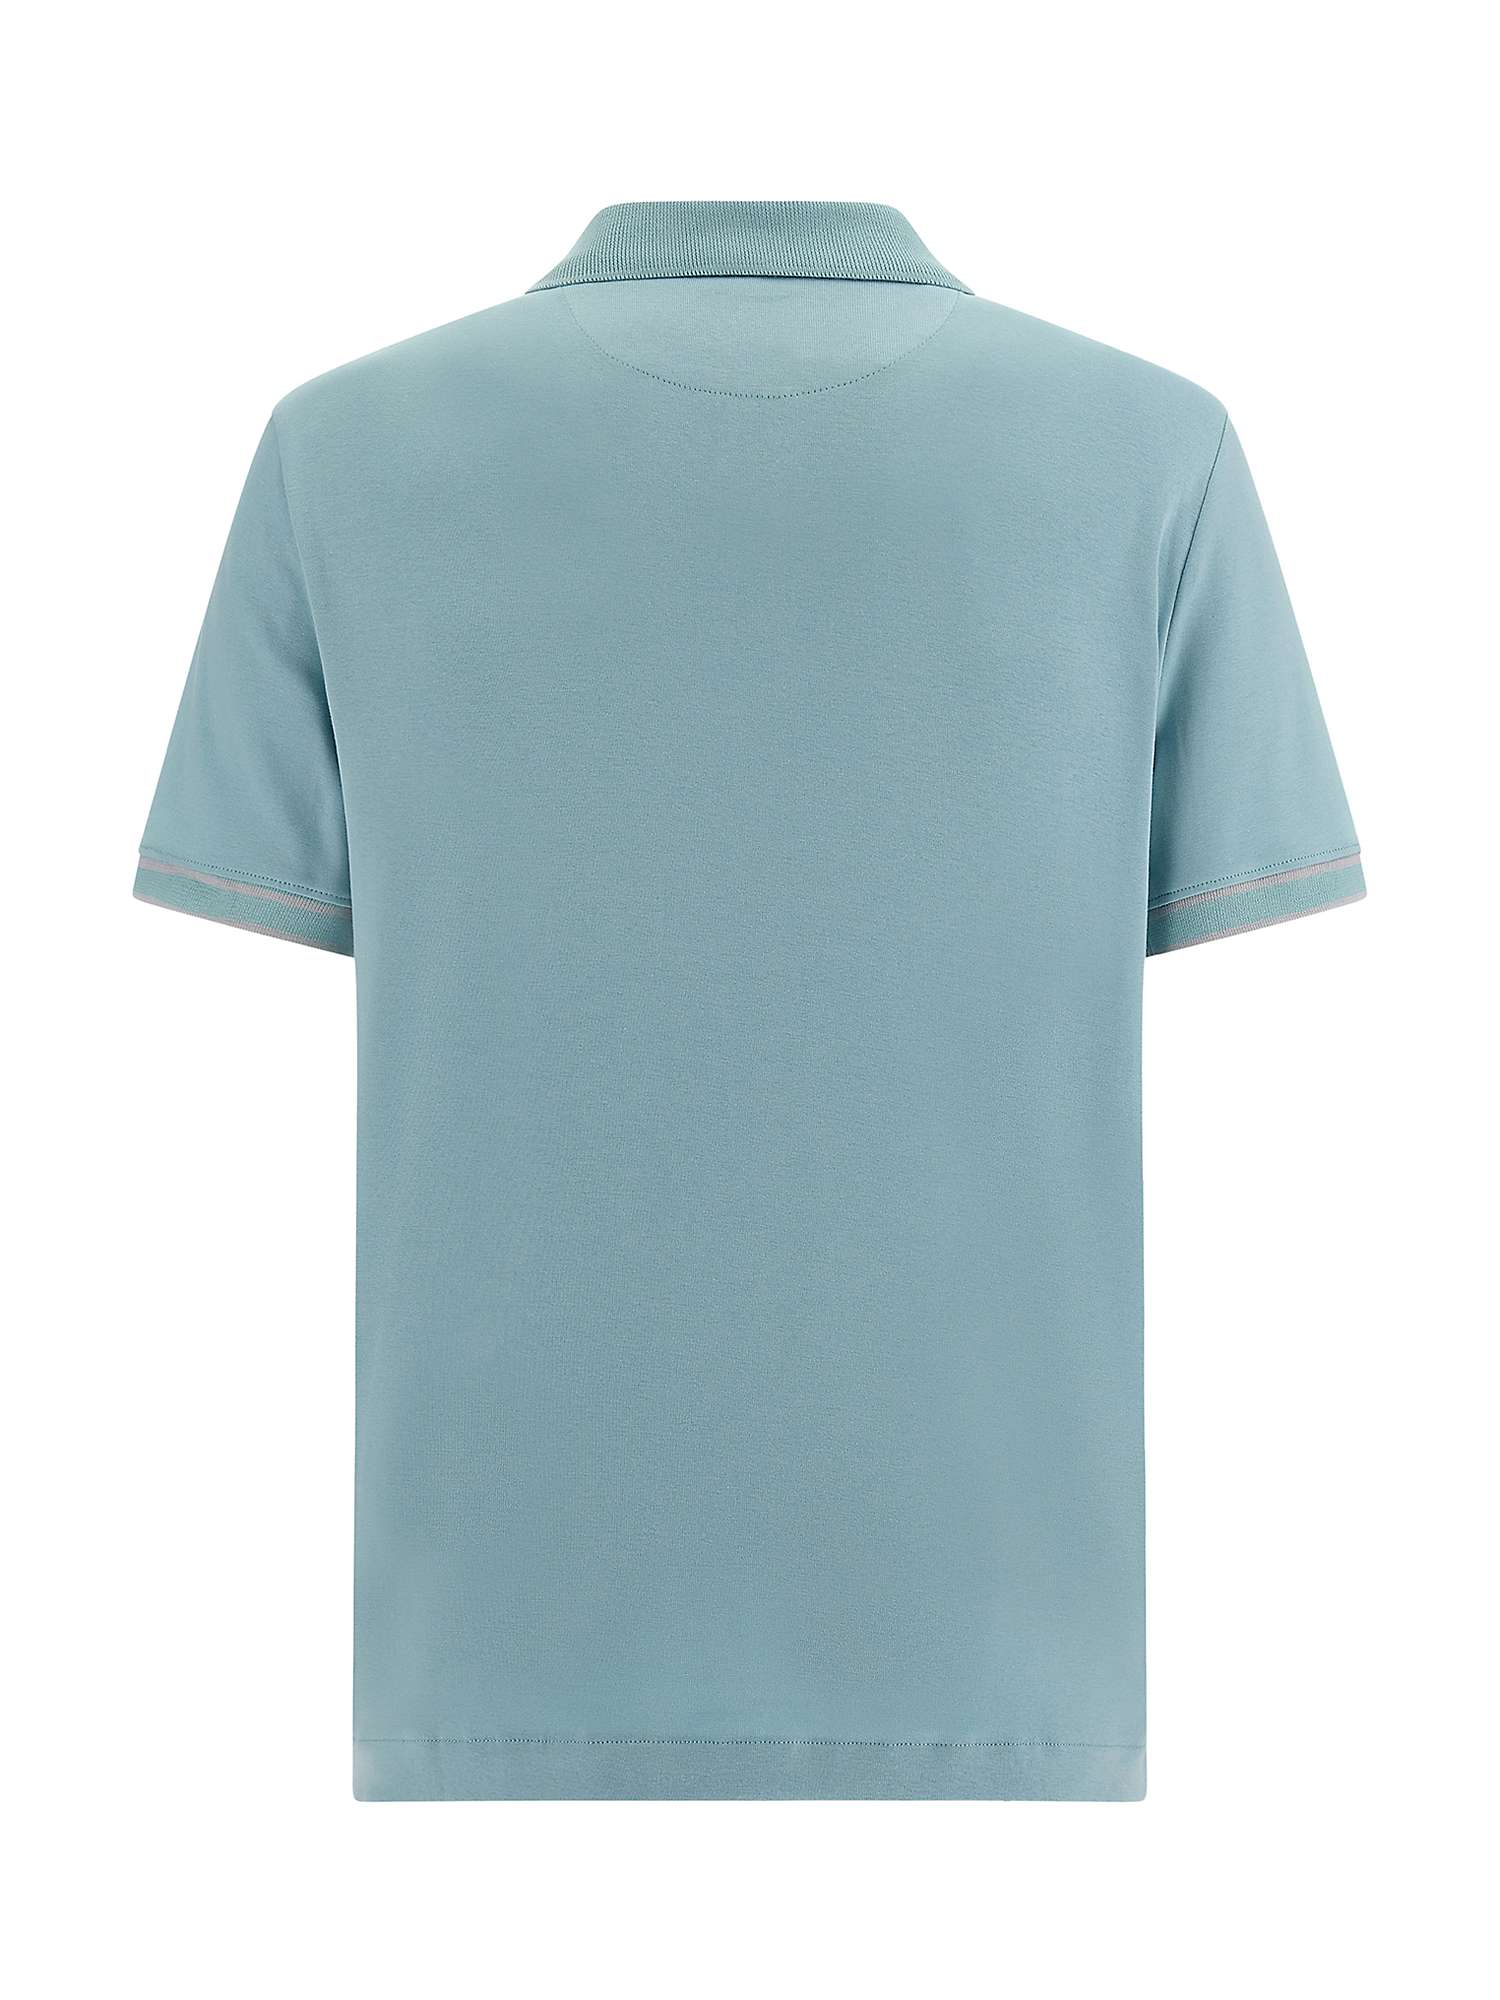 Buy GUESS Oliver Short Sleeve Polo Shirt, Blue Online at johnlewis.com